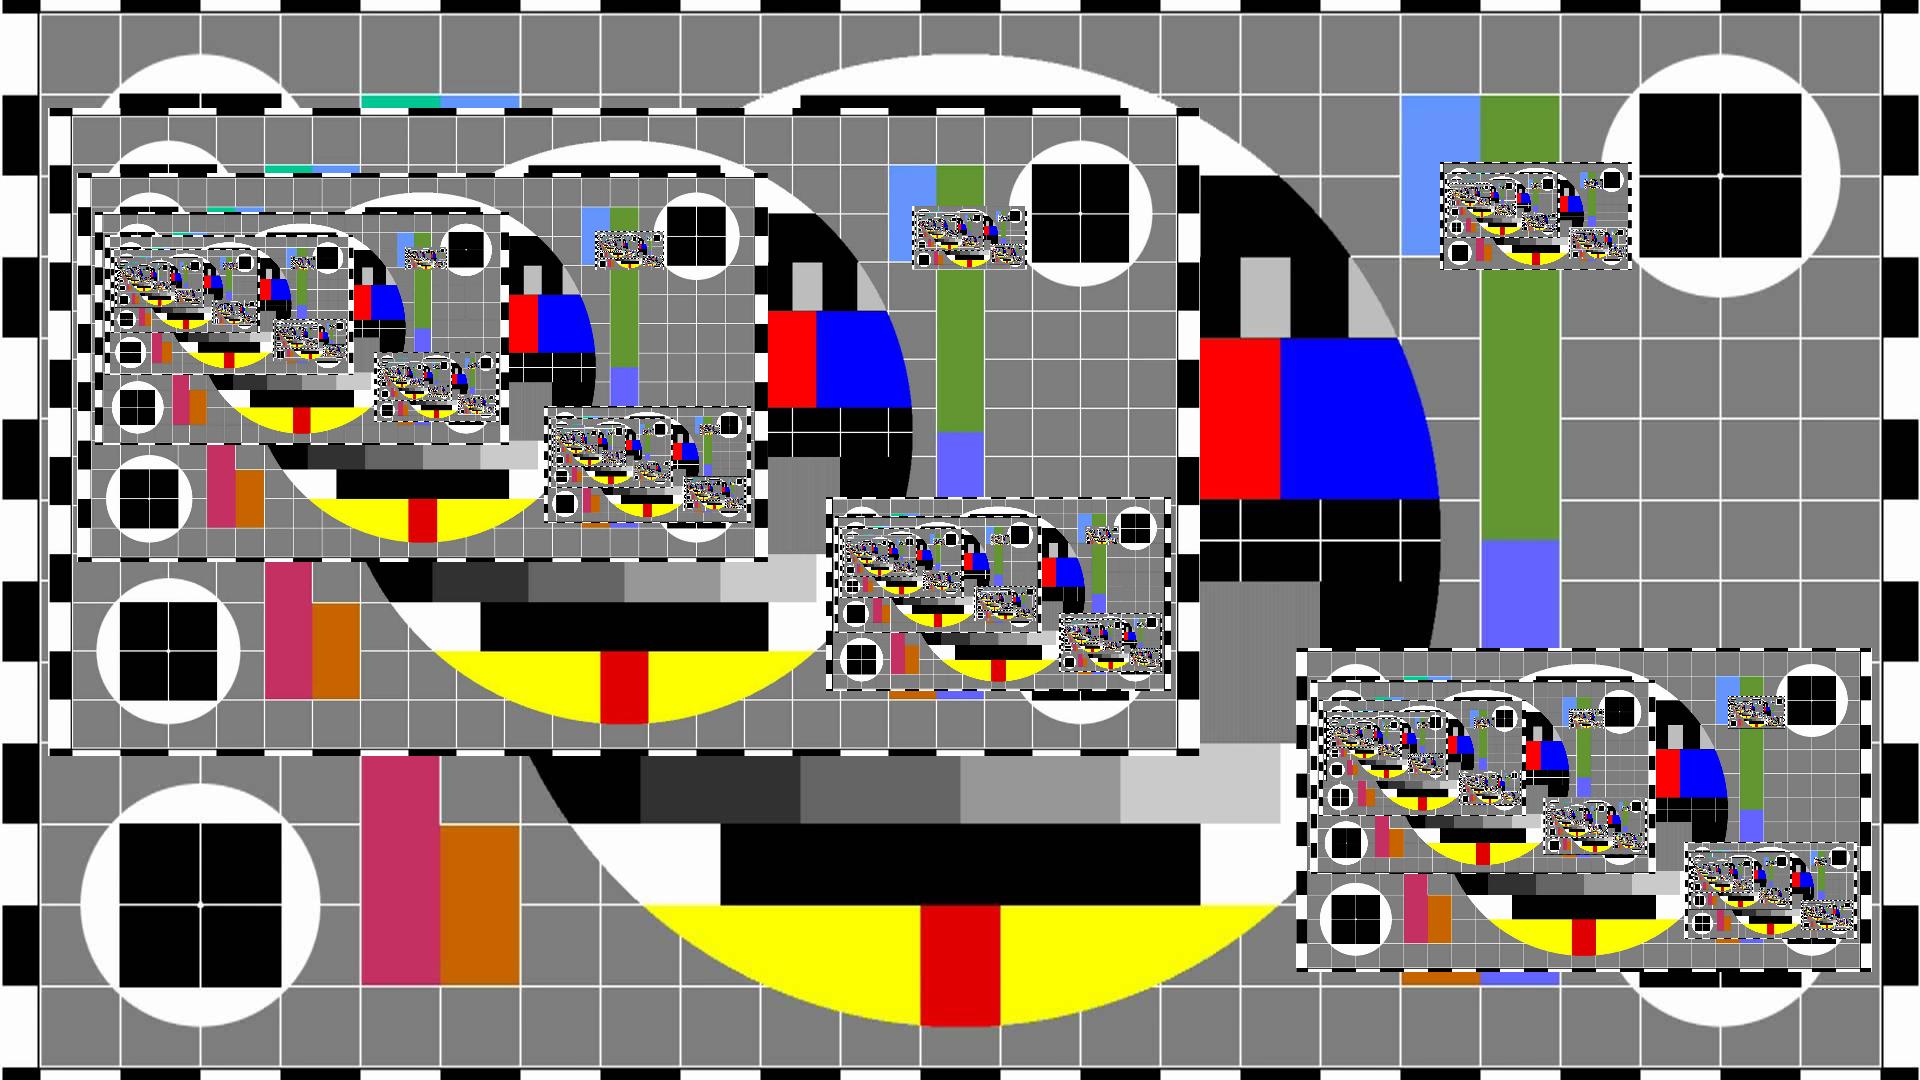 A test image with three Droste operations.